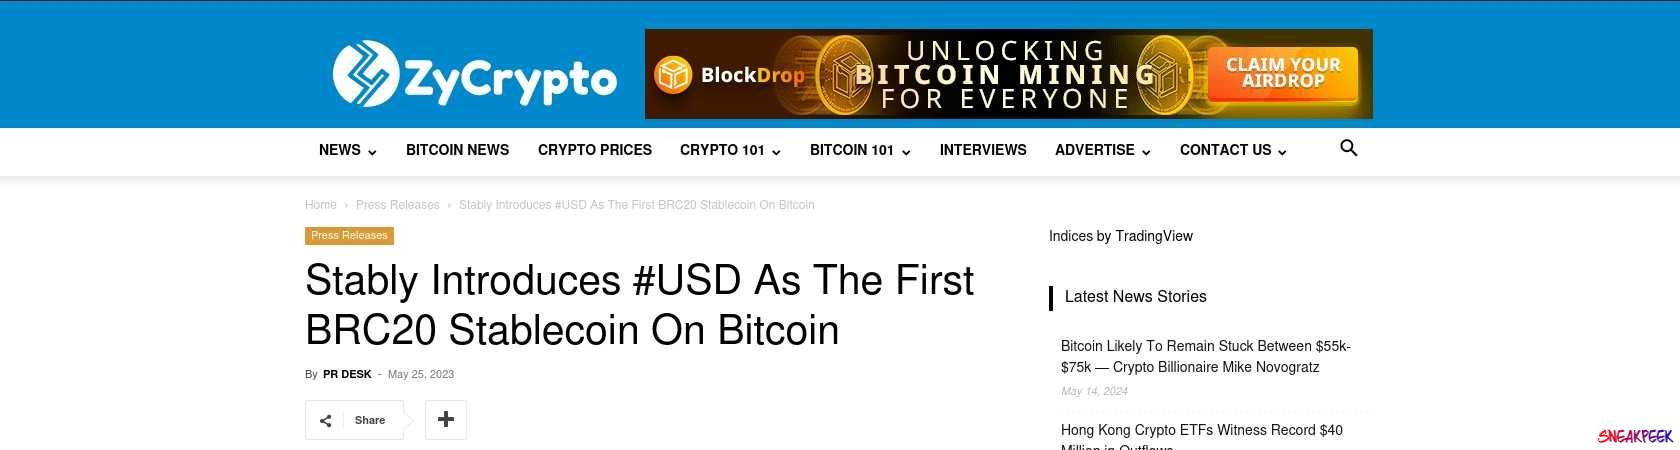 Read the full Article:  ⭲ Stably Introduces #USD As The First BRC20 Stablecoin On Bitcoin